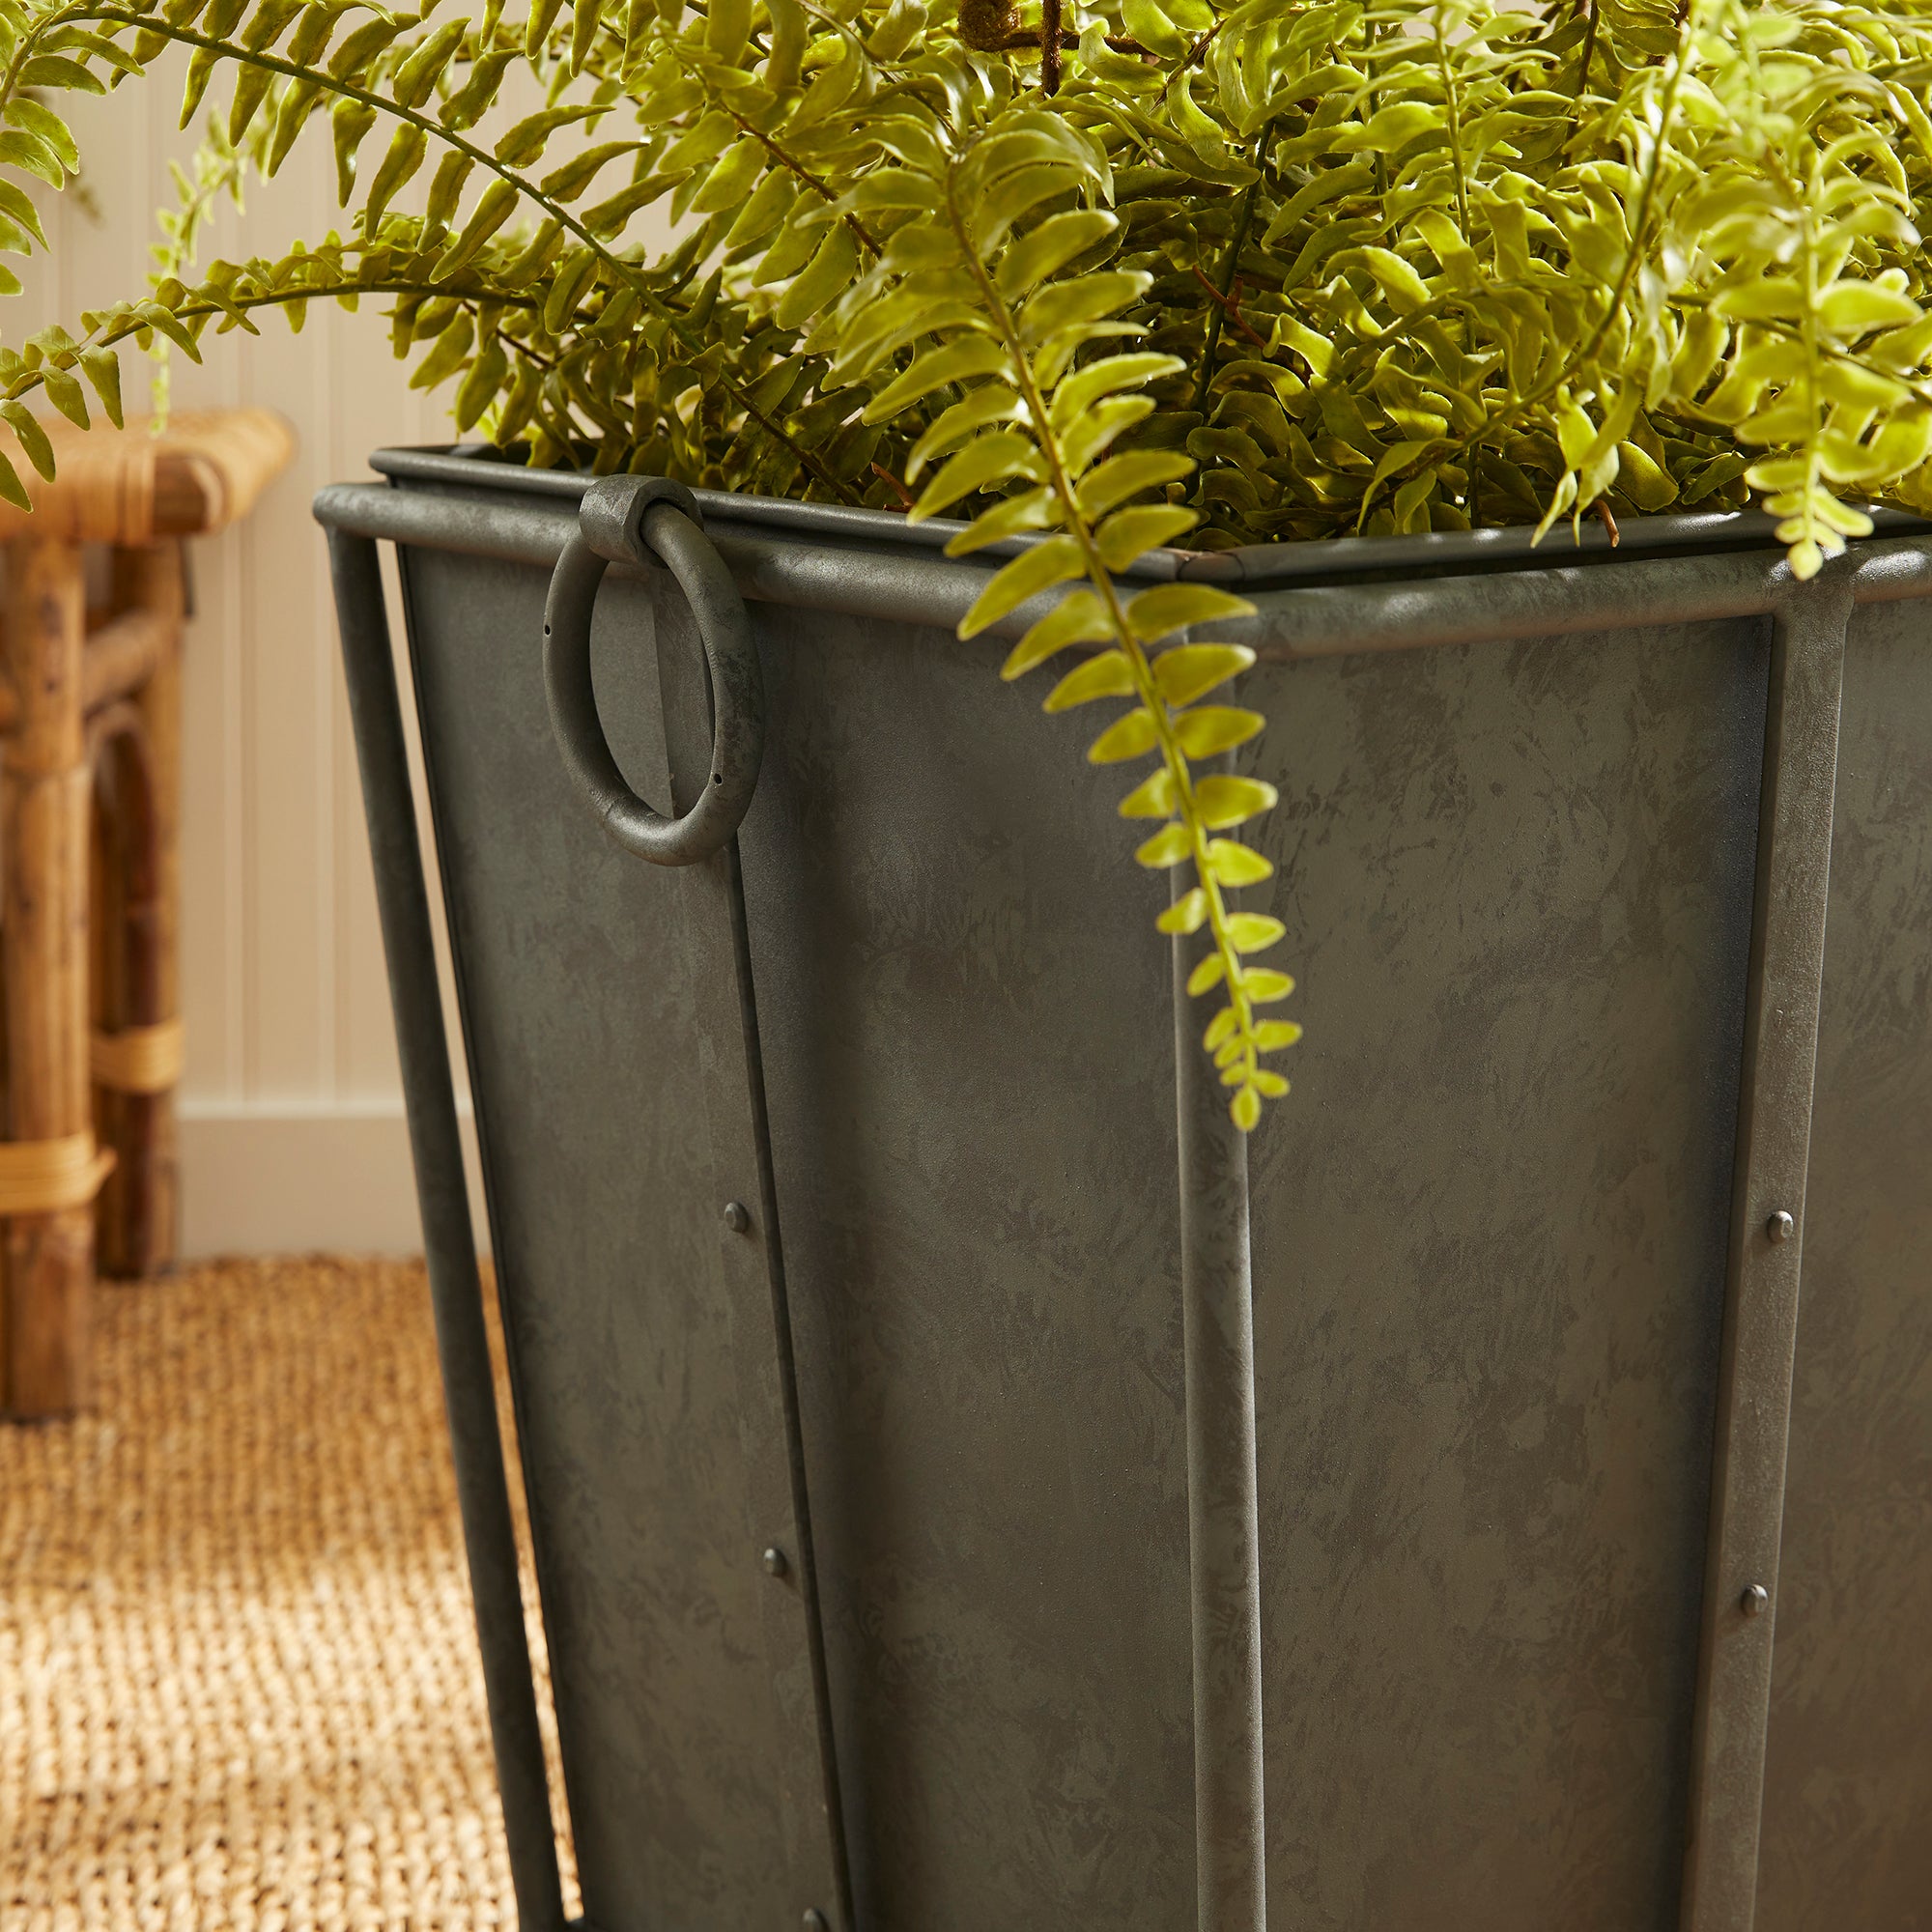 With metal liners that easily slide out, the Callahan Tapered Planter is as practical as it is handsome. The rounded handles and traditional design make it an outdoor classic. Amethyst Home provides interior design, new construction, custom furniture, and area rugs in the Monterey metro area.